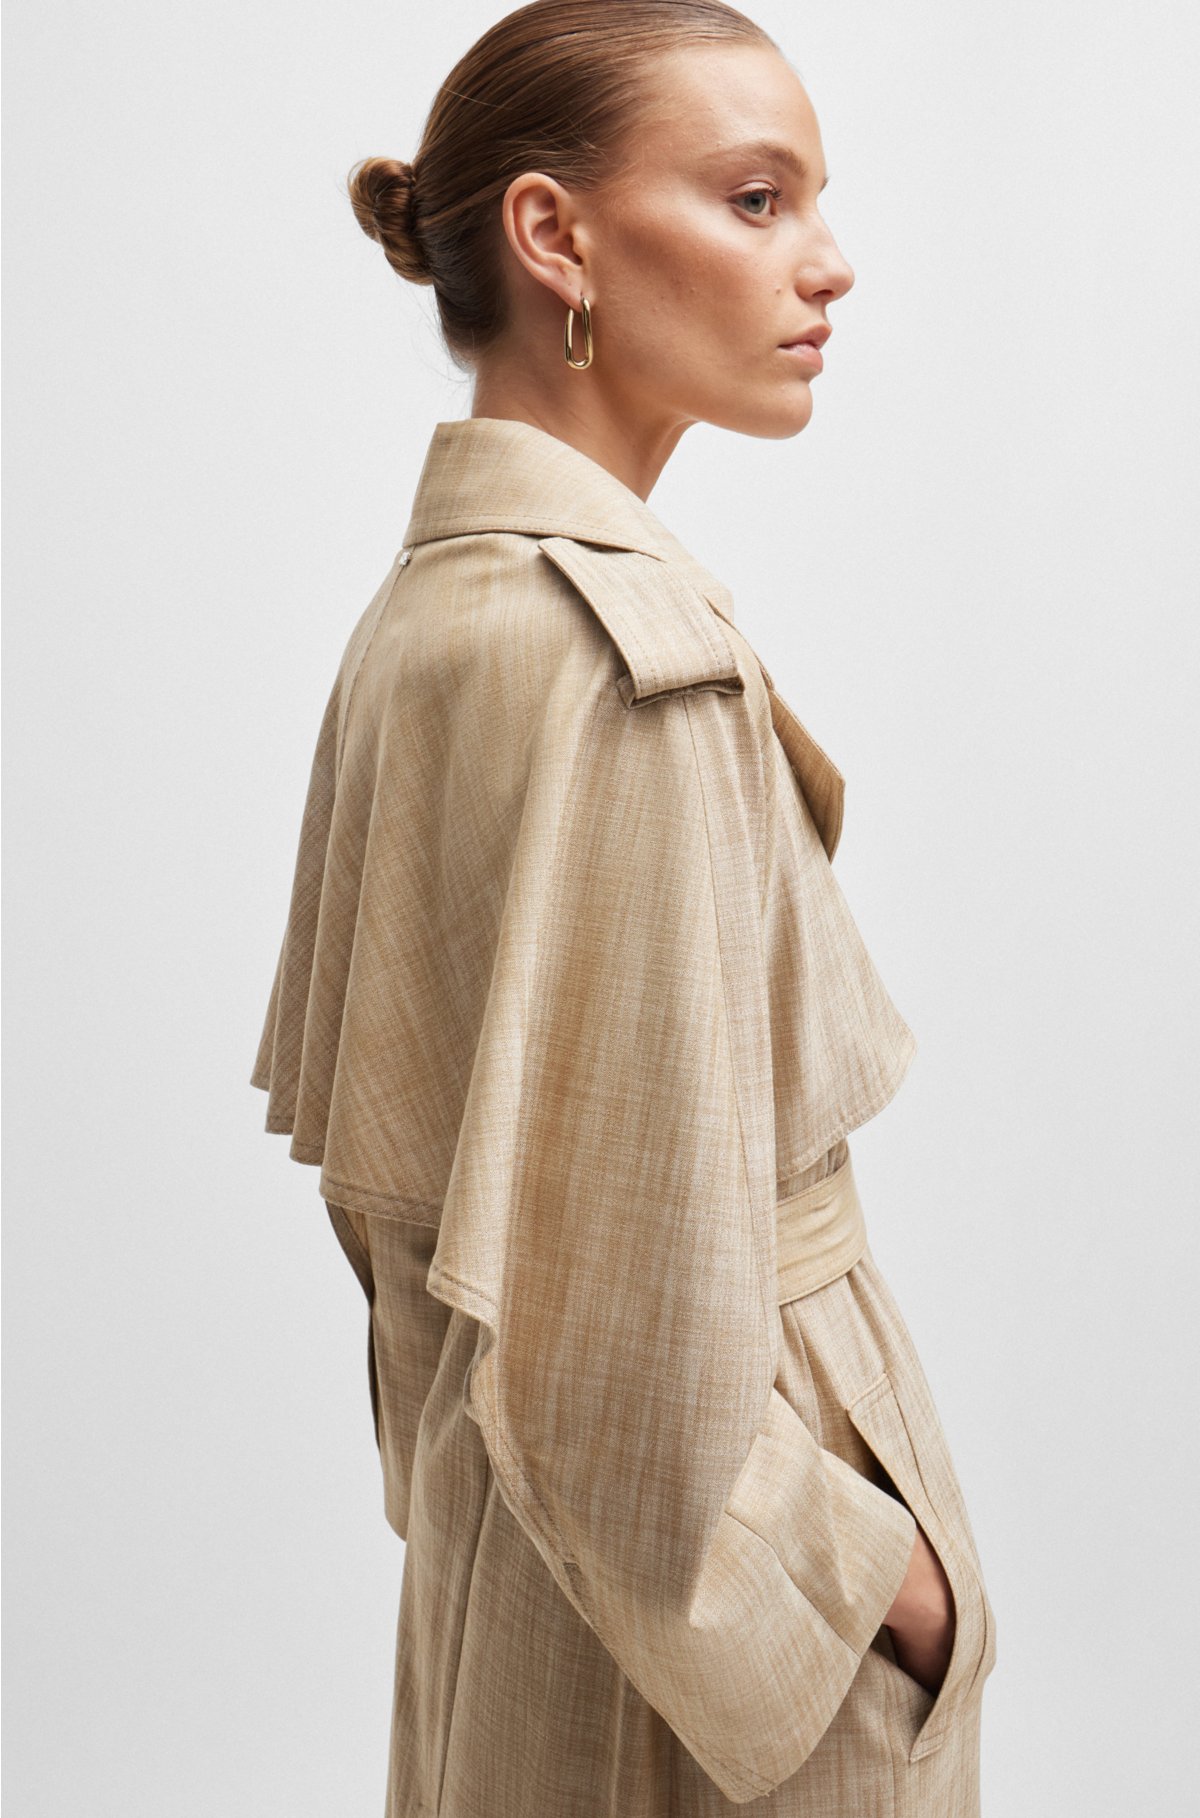 Double-breasted trench coat in pinstripe material, Beige